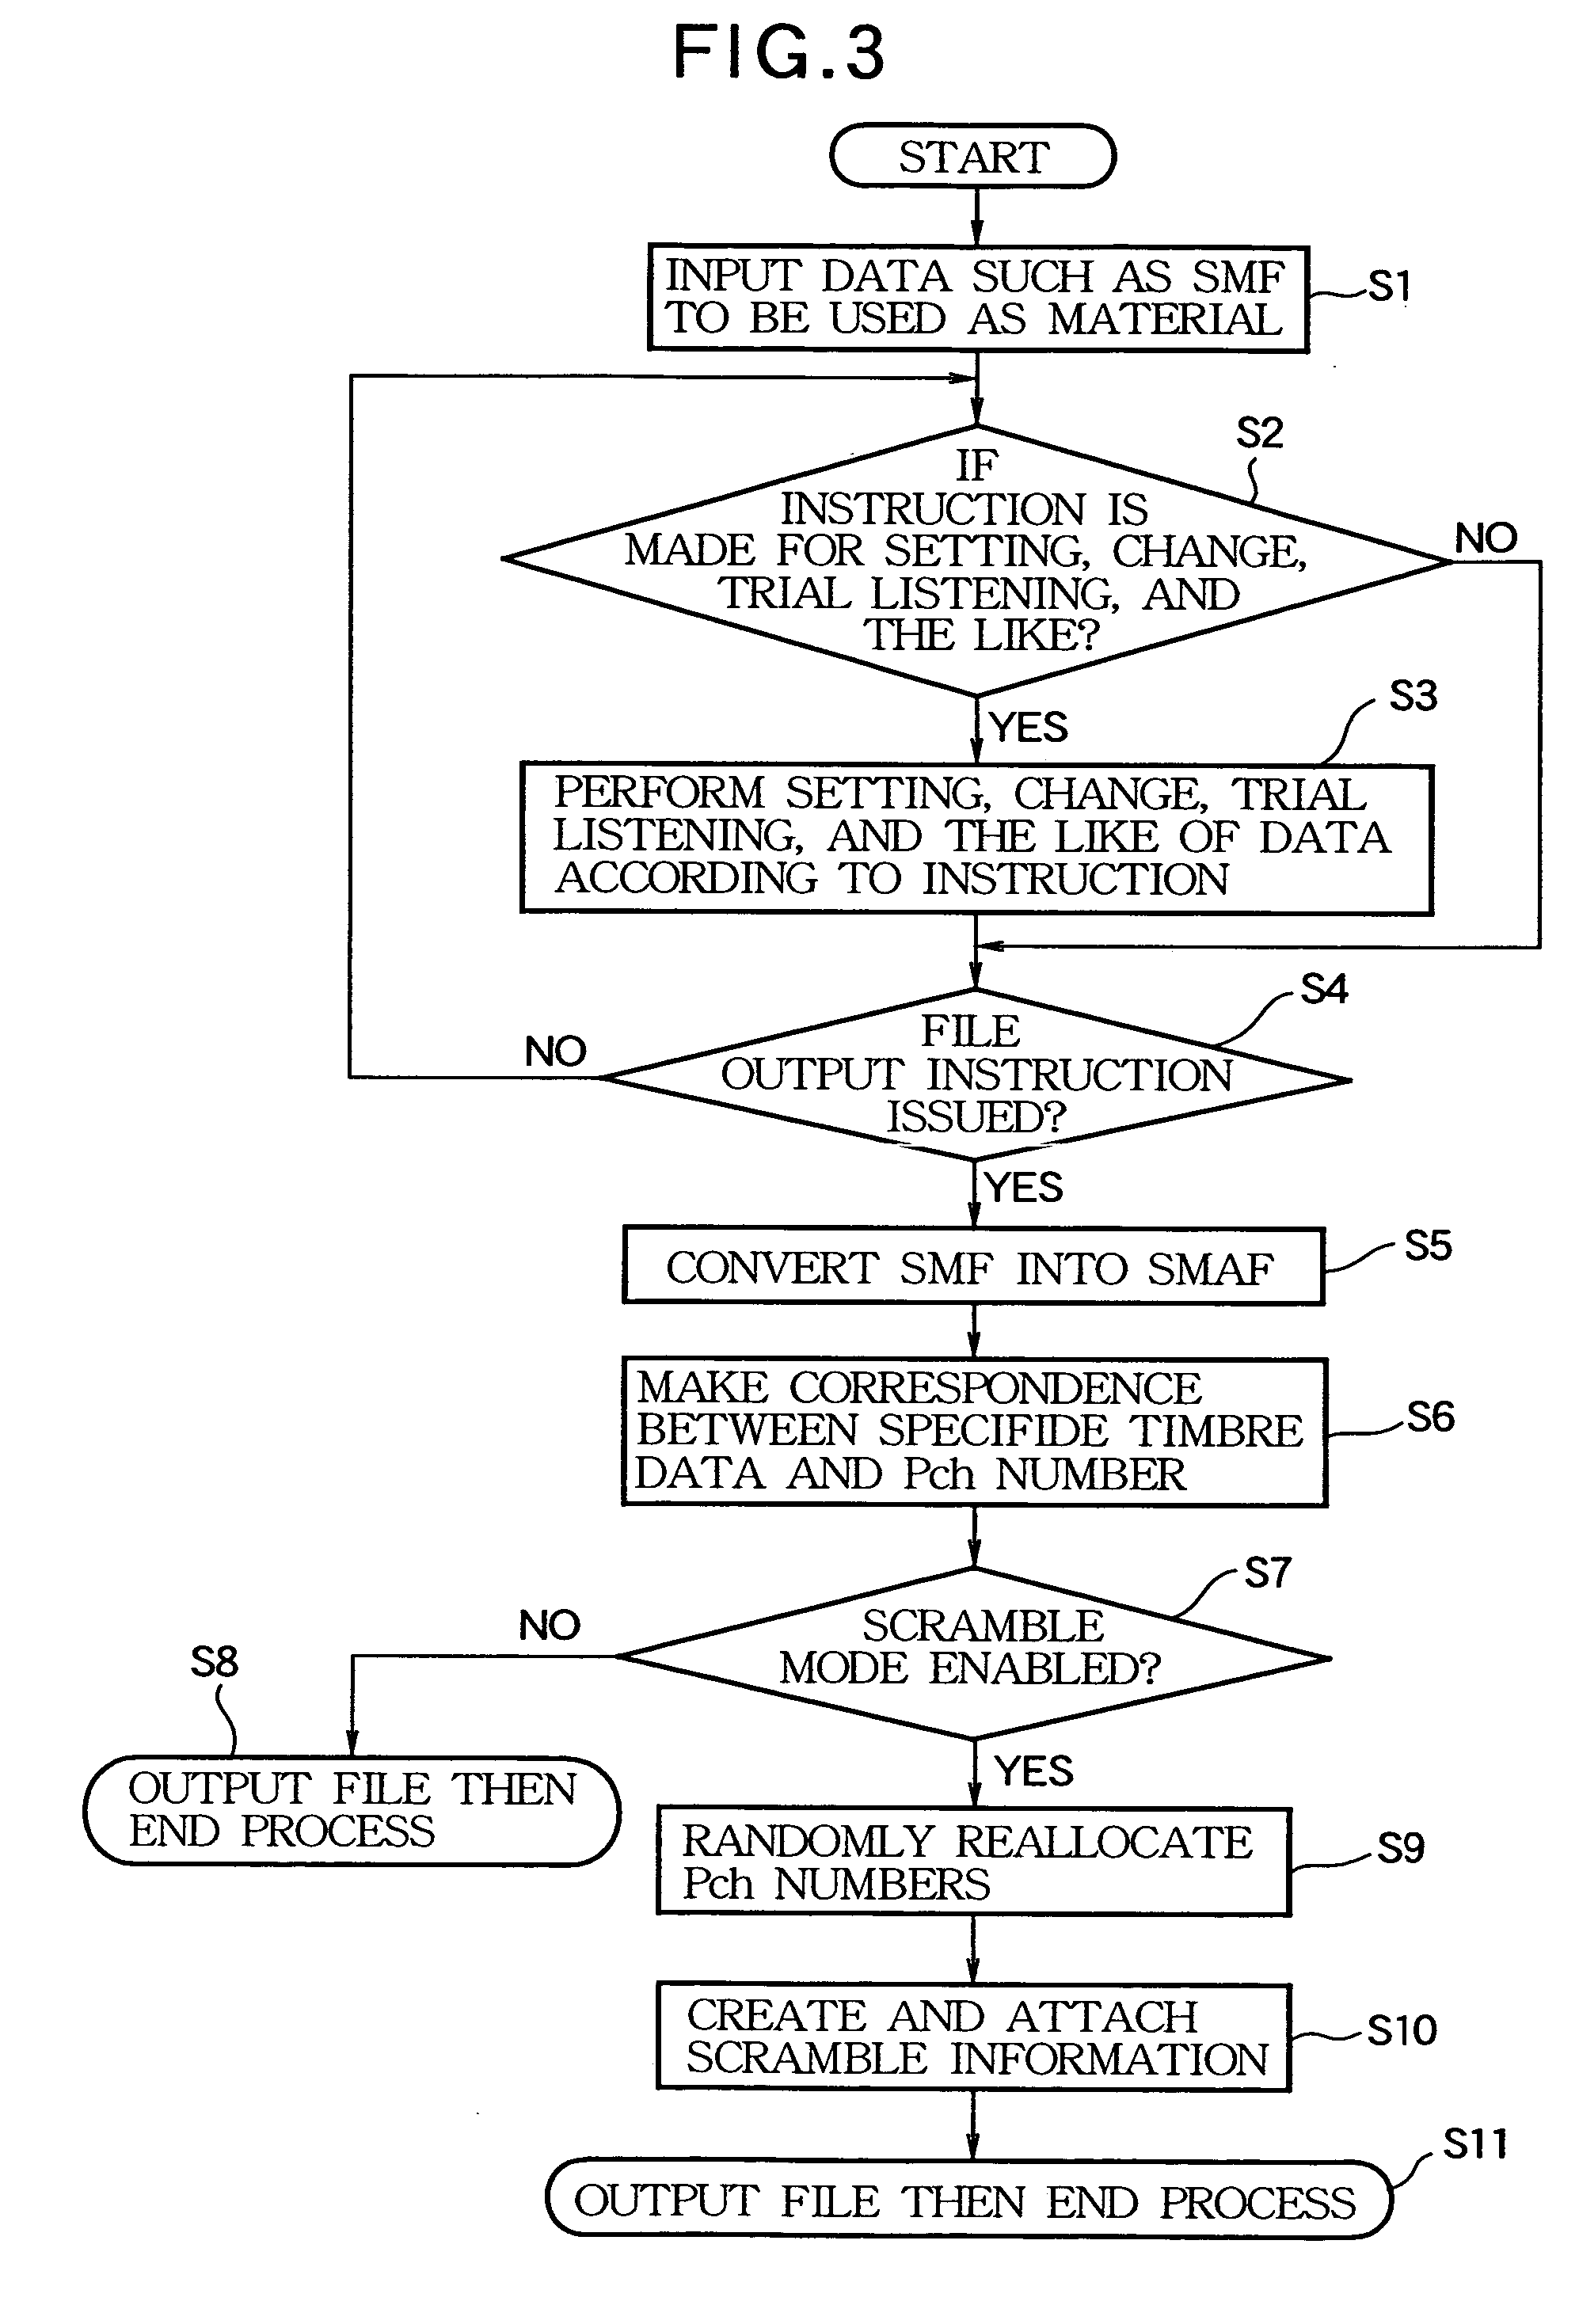 Scrambling method of music sequence data for incompatible sound generator